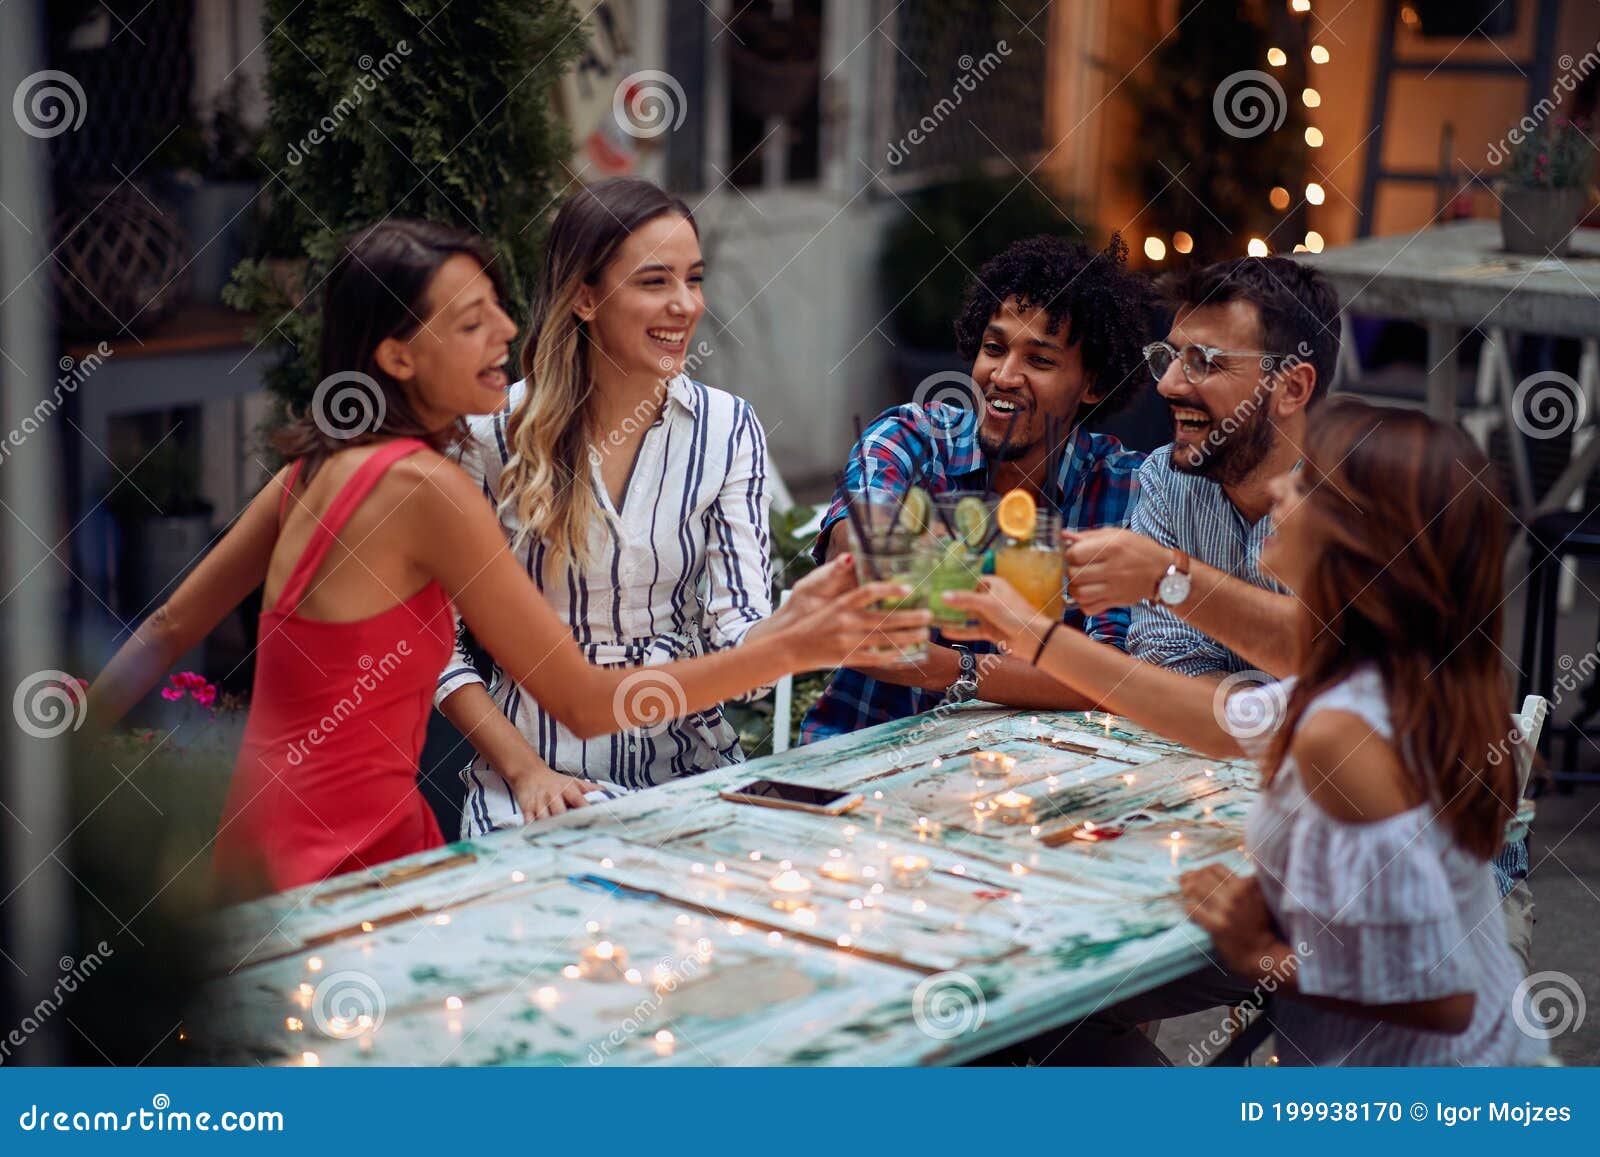 A Group of Happy Friends Having a Toast at the Open Air Birthday Party. Quality Friendship Time Together Stock Photo - of multiethnic, lovely: 199938170